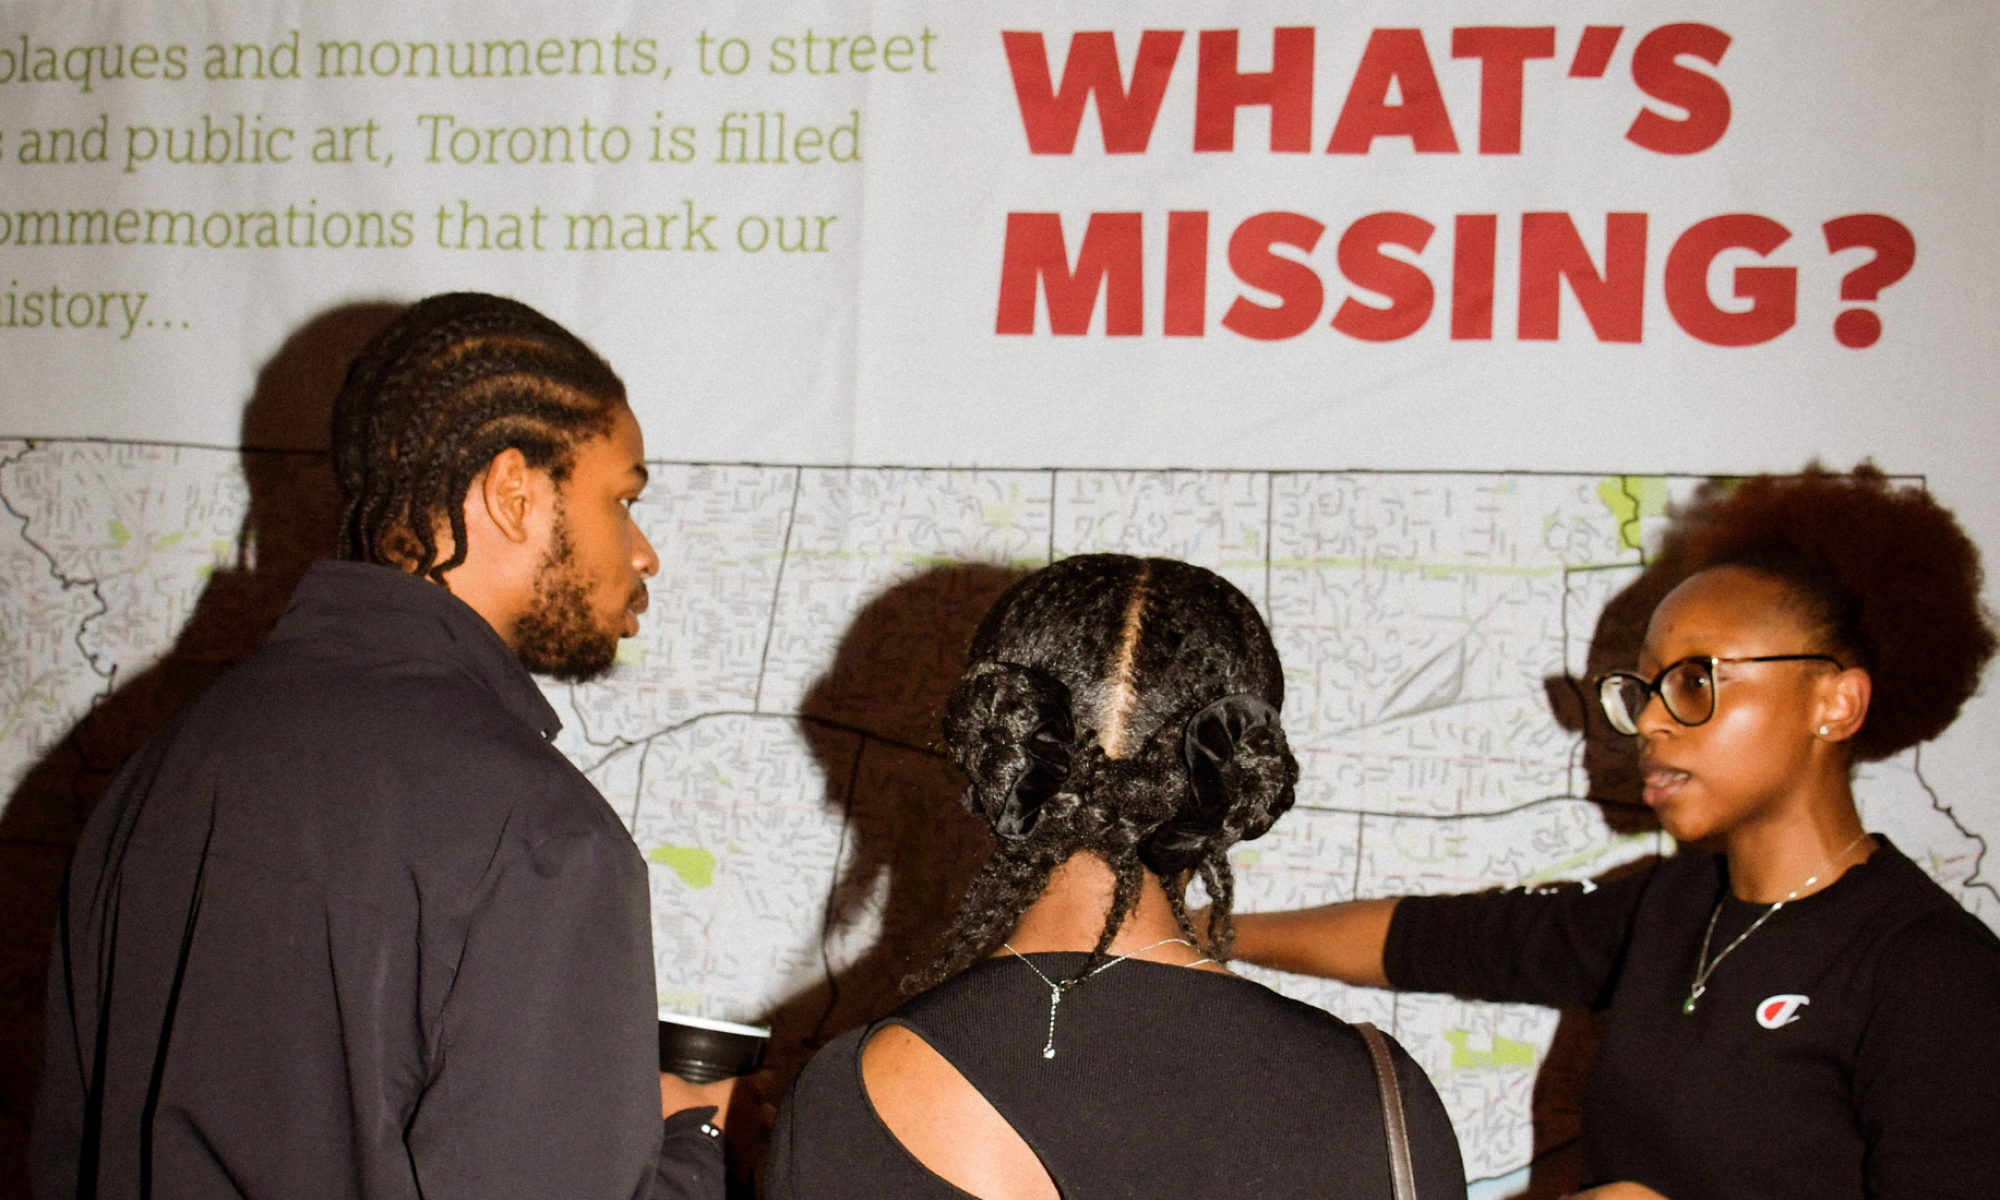 Three people talking and looking at a map of Toronto that says "Whats Missing?"